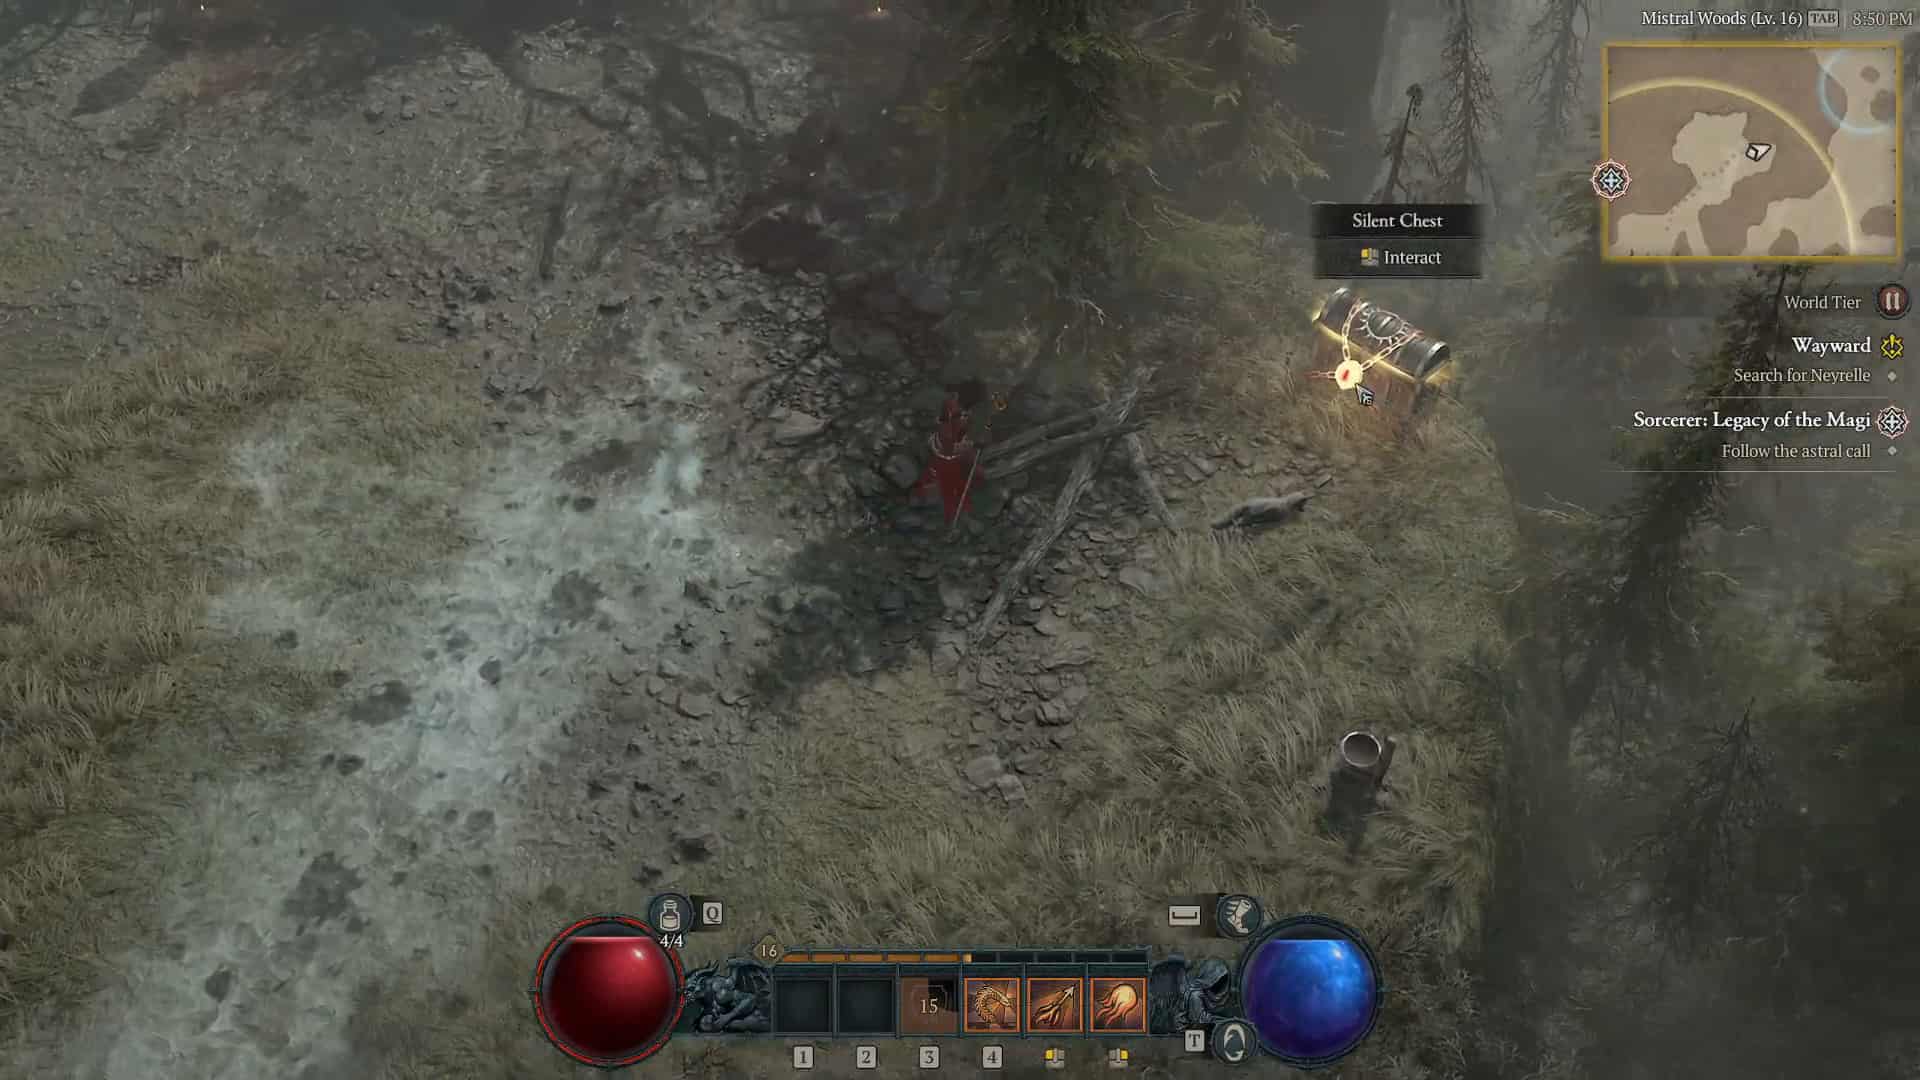 Diablo 4 Silent Chest locations: An image of a character next to Silent Chest.